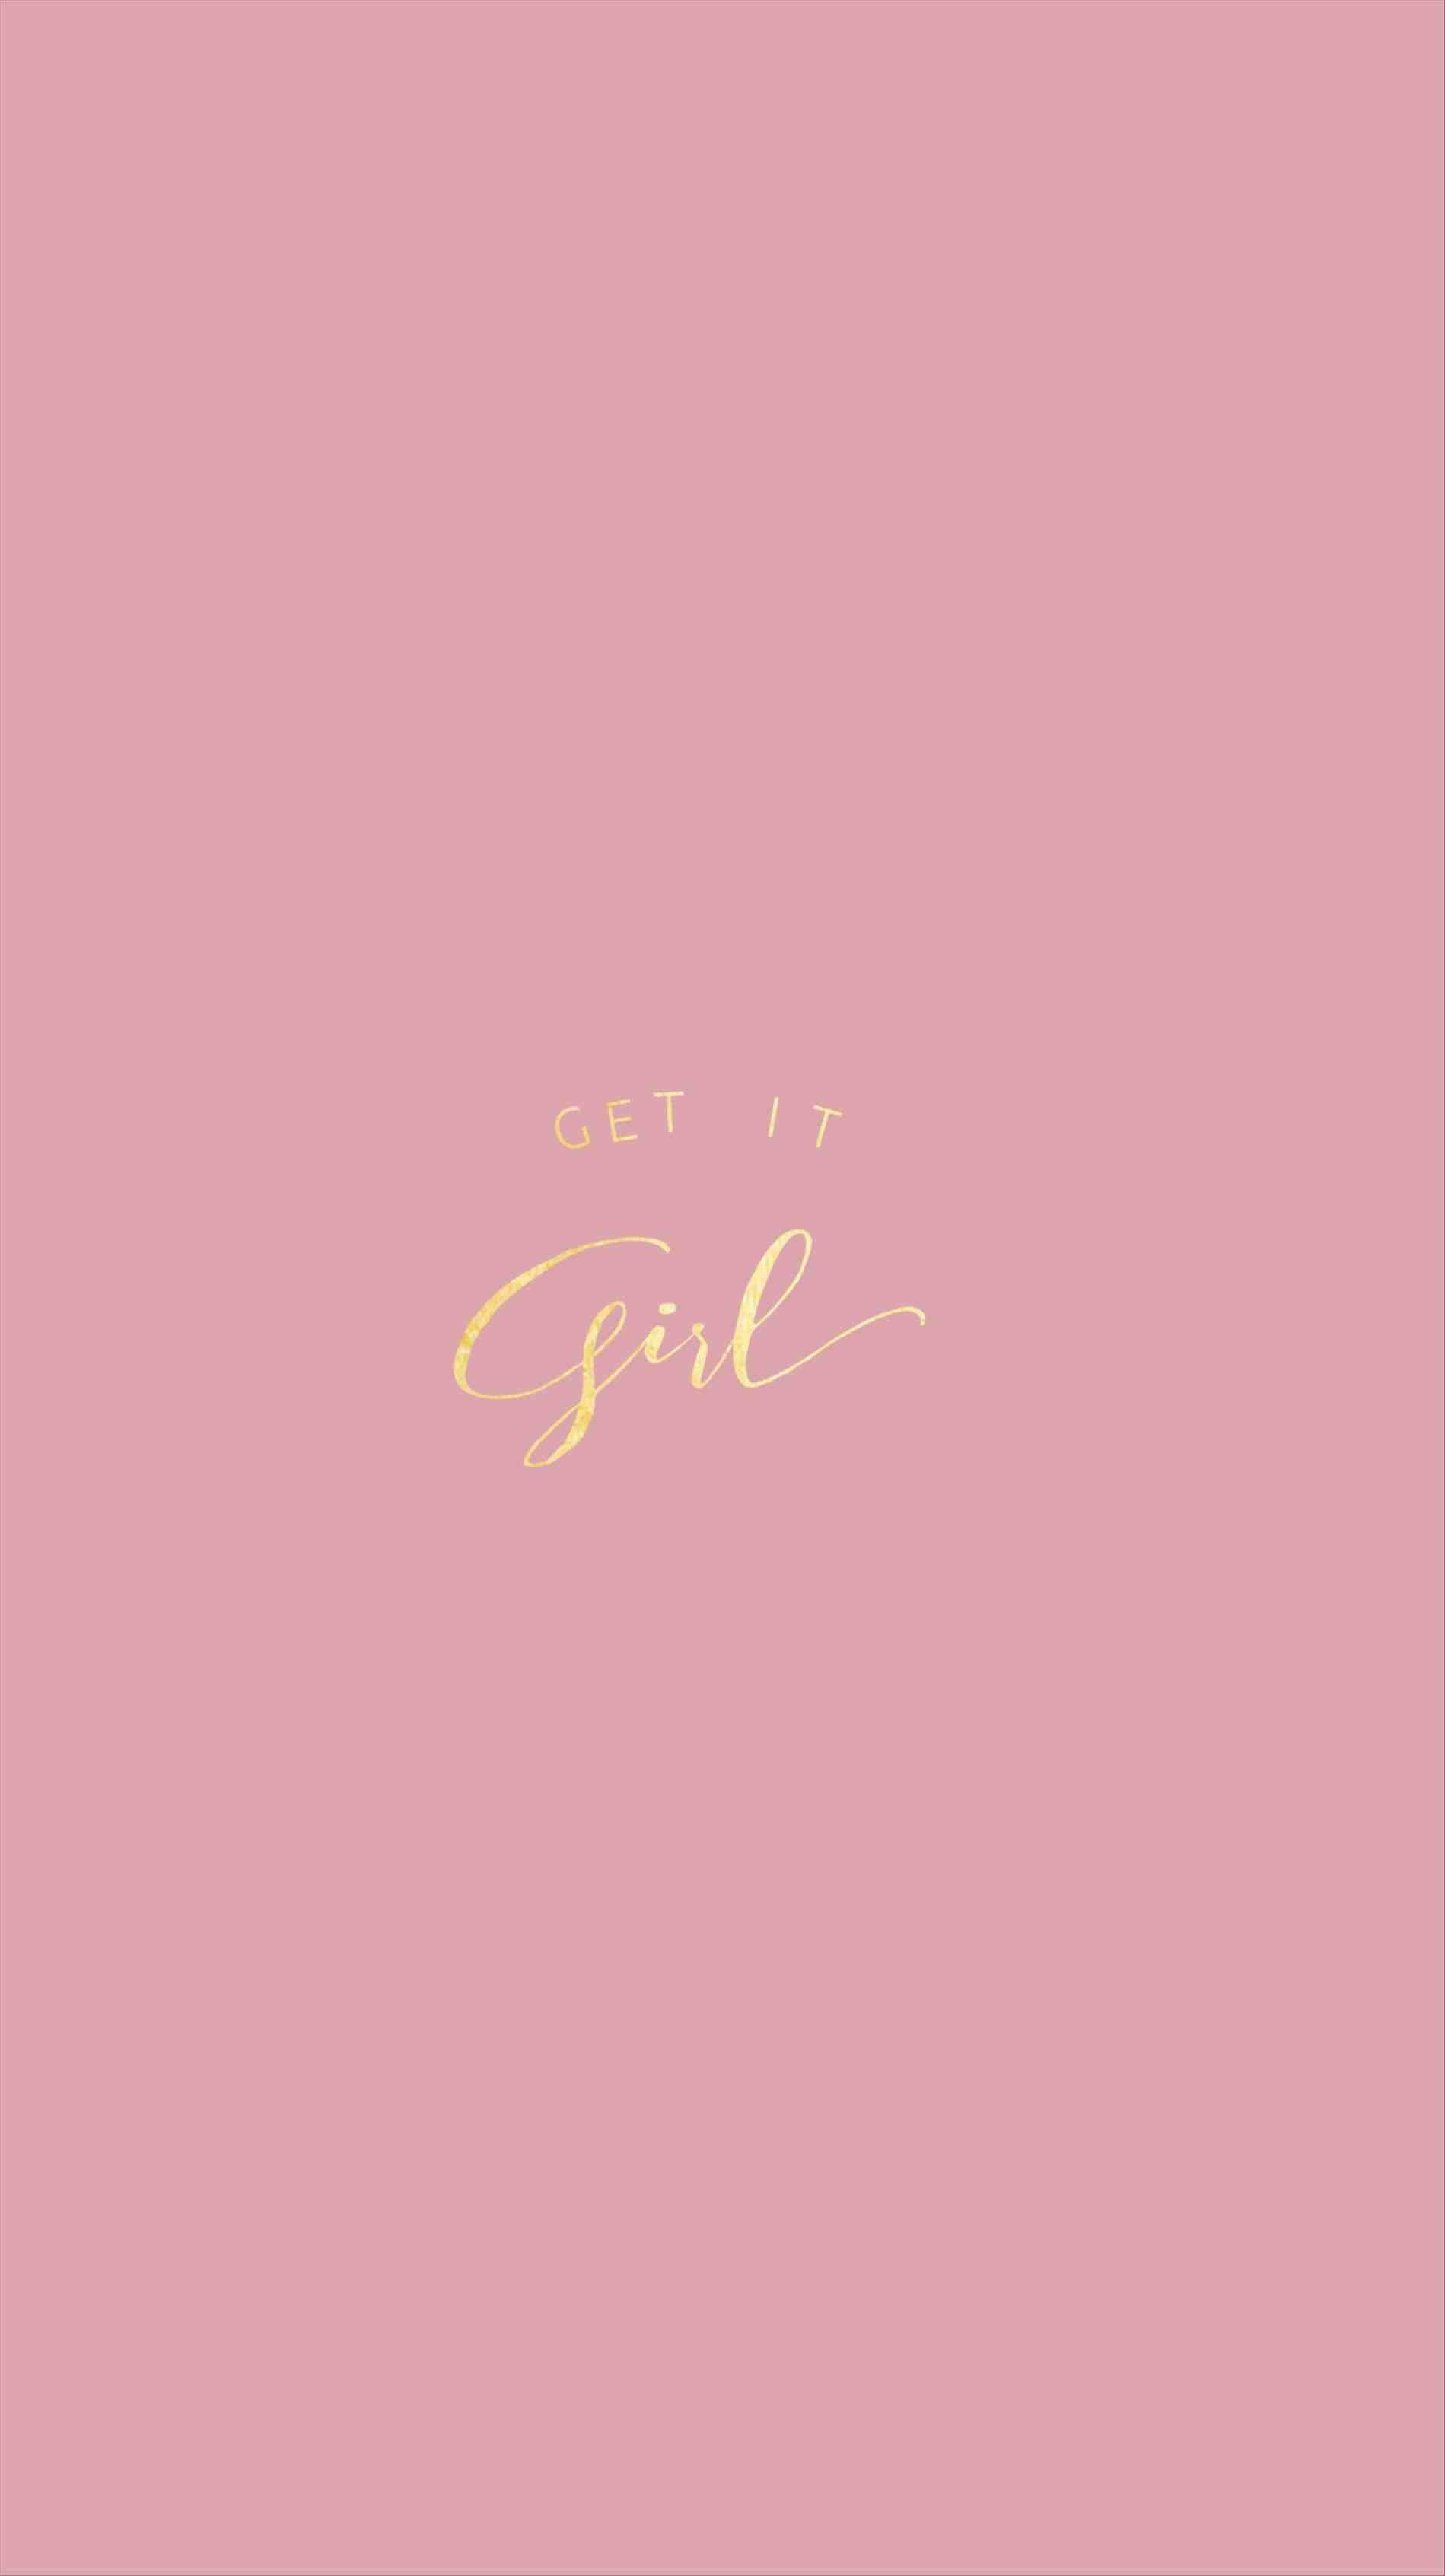 Get it girl wallpaper for your phone. Pink and gold. Phone background. Phone wallpaper. - Pink phone